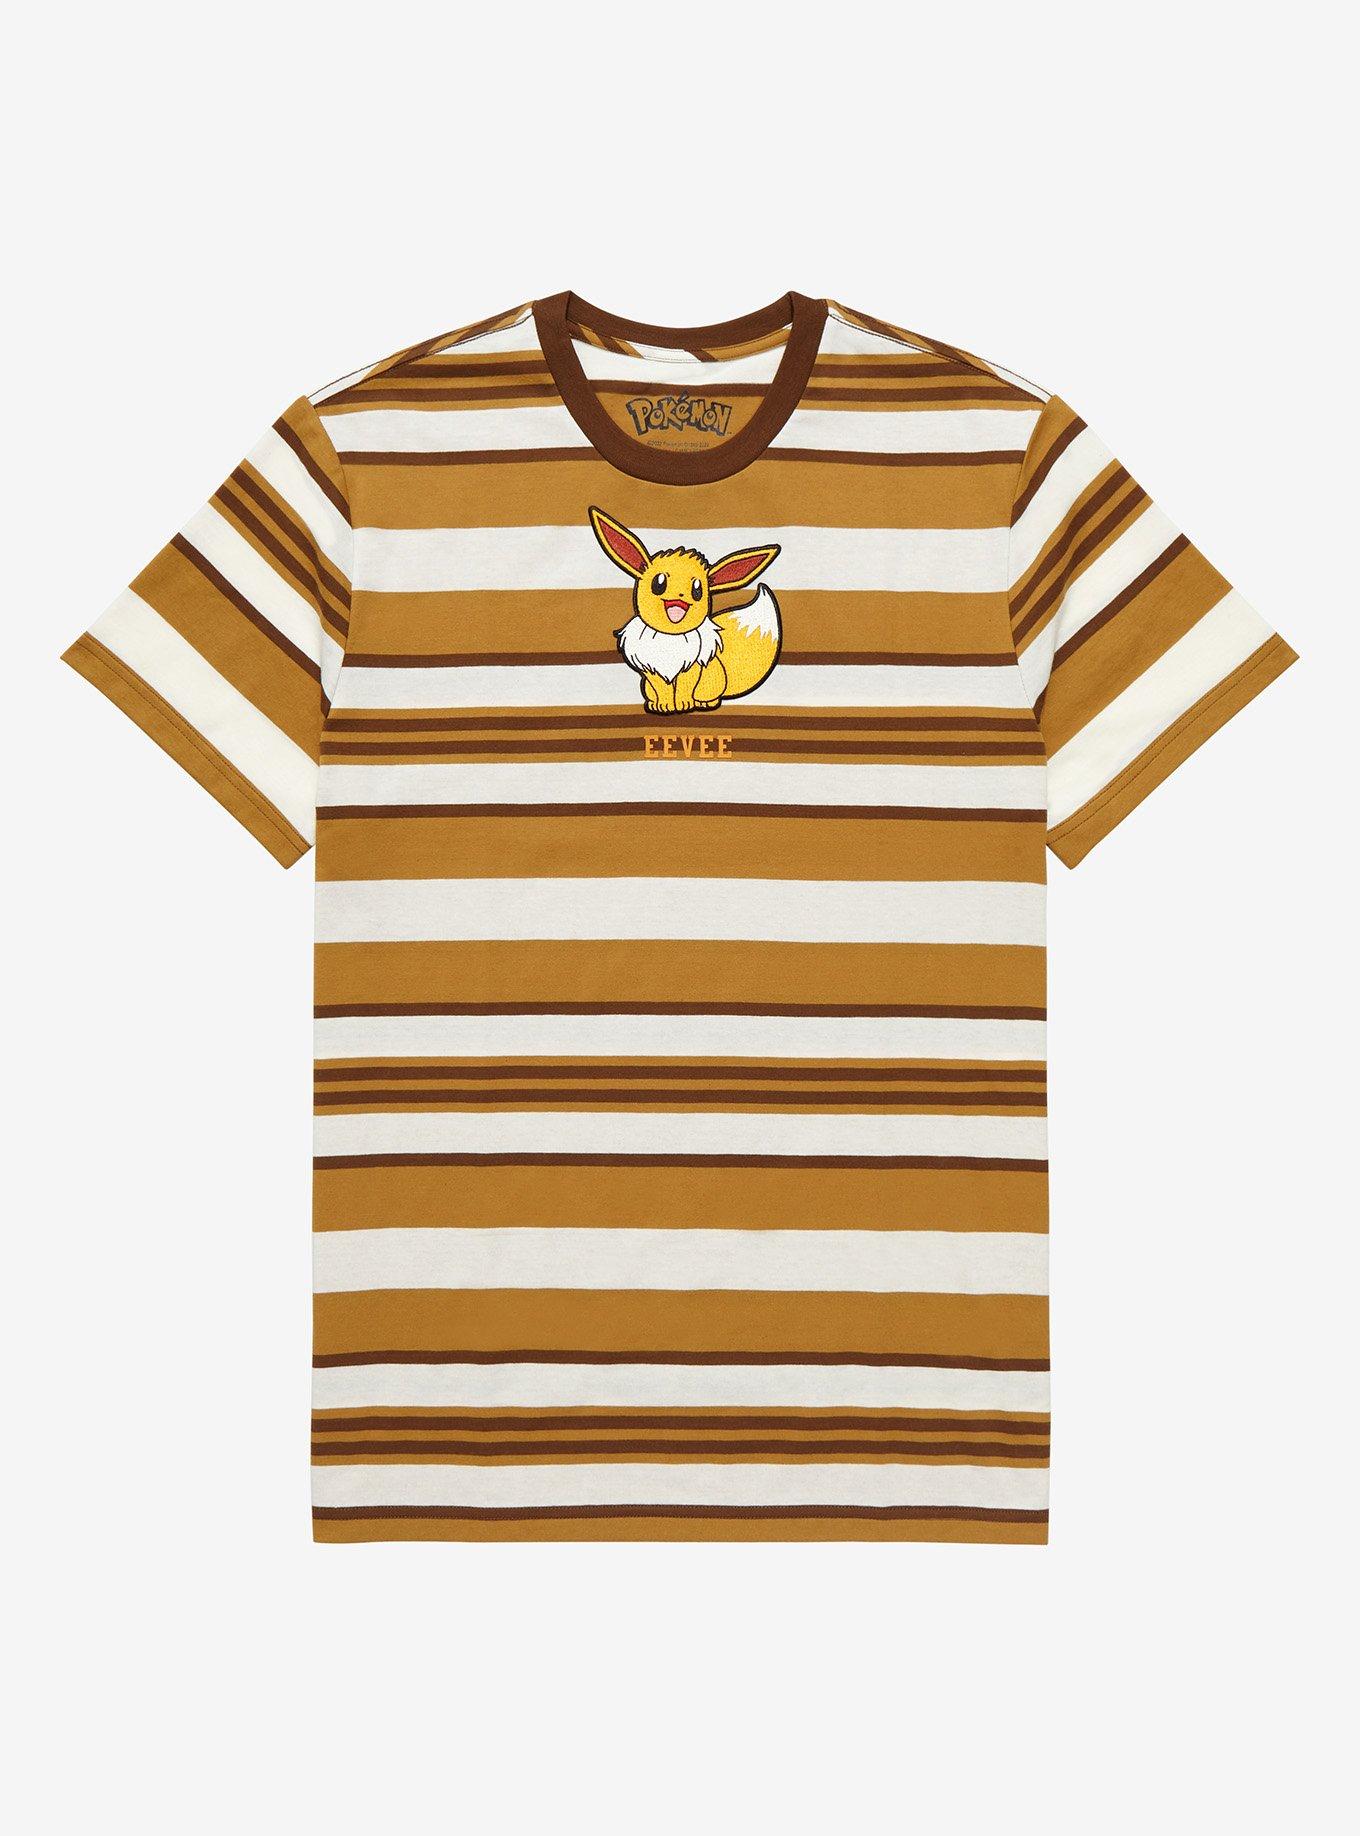 Pokémon Eevee Striped T-Shirt - BoxLunch Exclusive